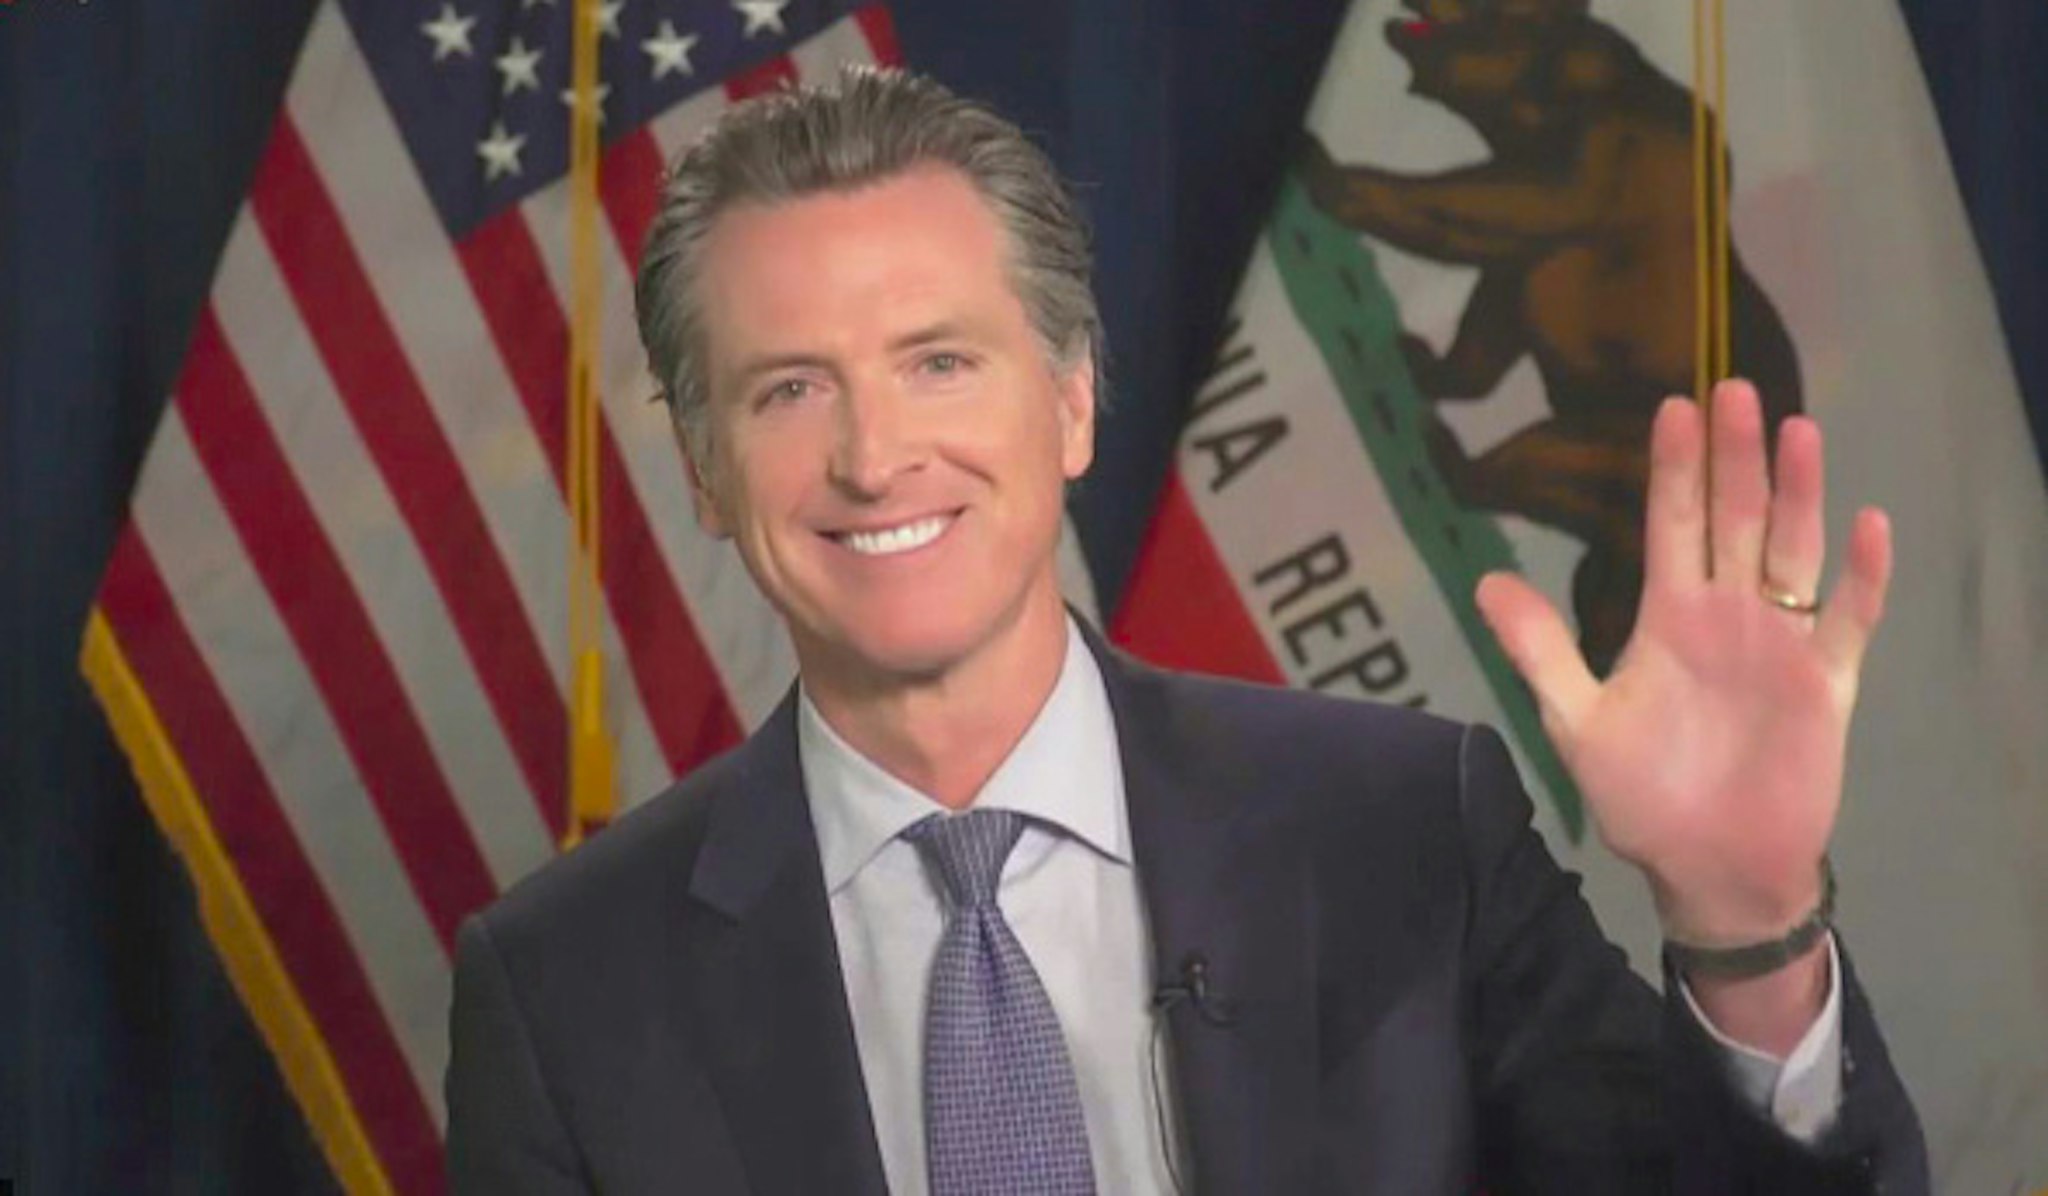 LOS ANGELES - JUNE 17: James chats with California Governor Gavin Newsom from his garage on THE LATE LATE SHOW WITH JAMES CORDEN, scheduled to air Wednesday June 17, 2020 (12:37-1:37 AM, ET/PT) on the CBS Television Network. Image is a screen grab.